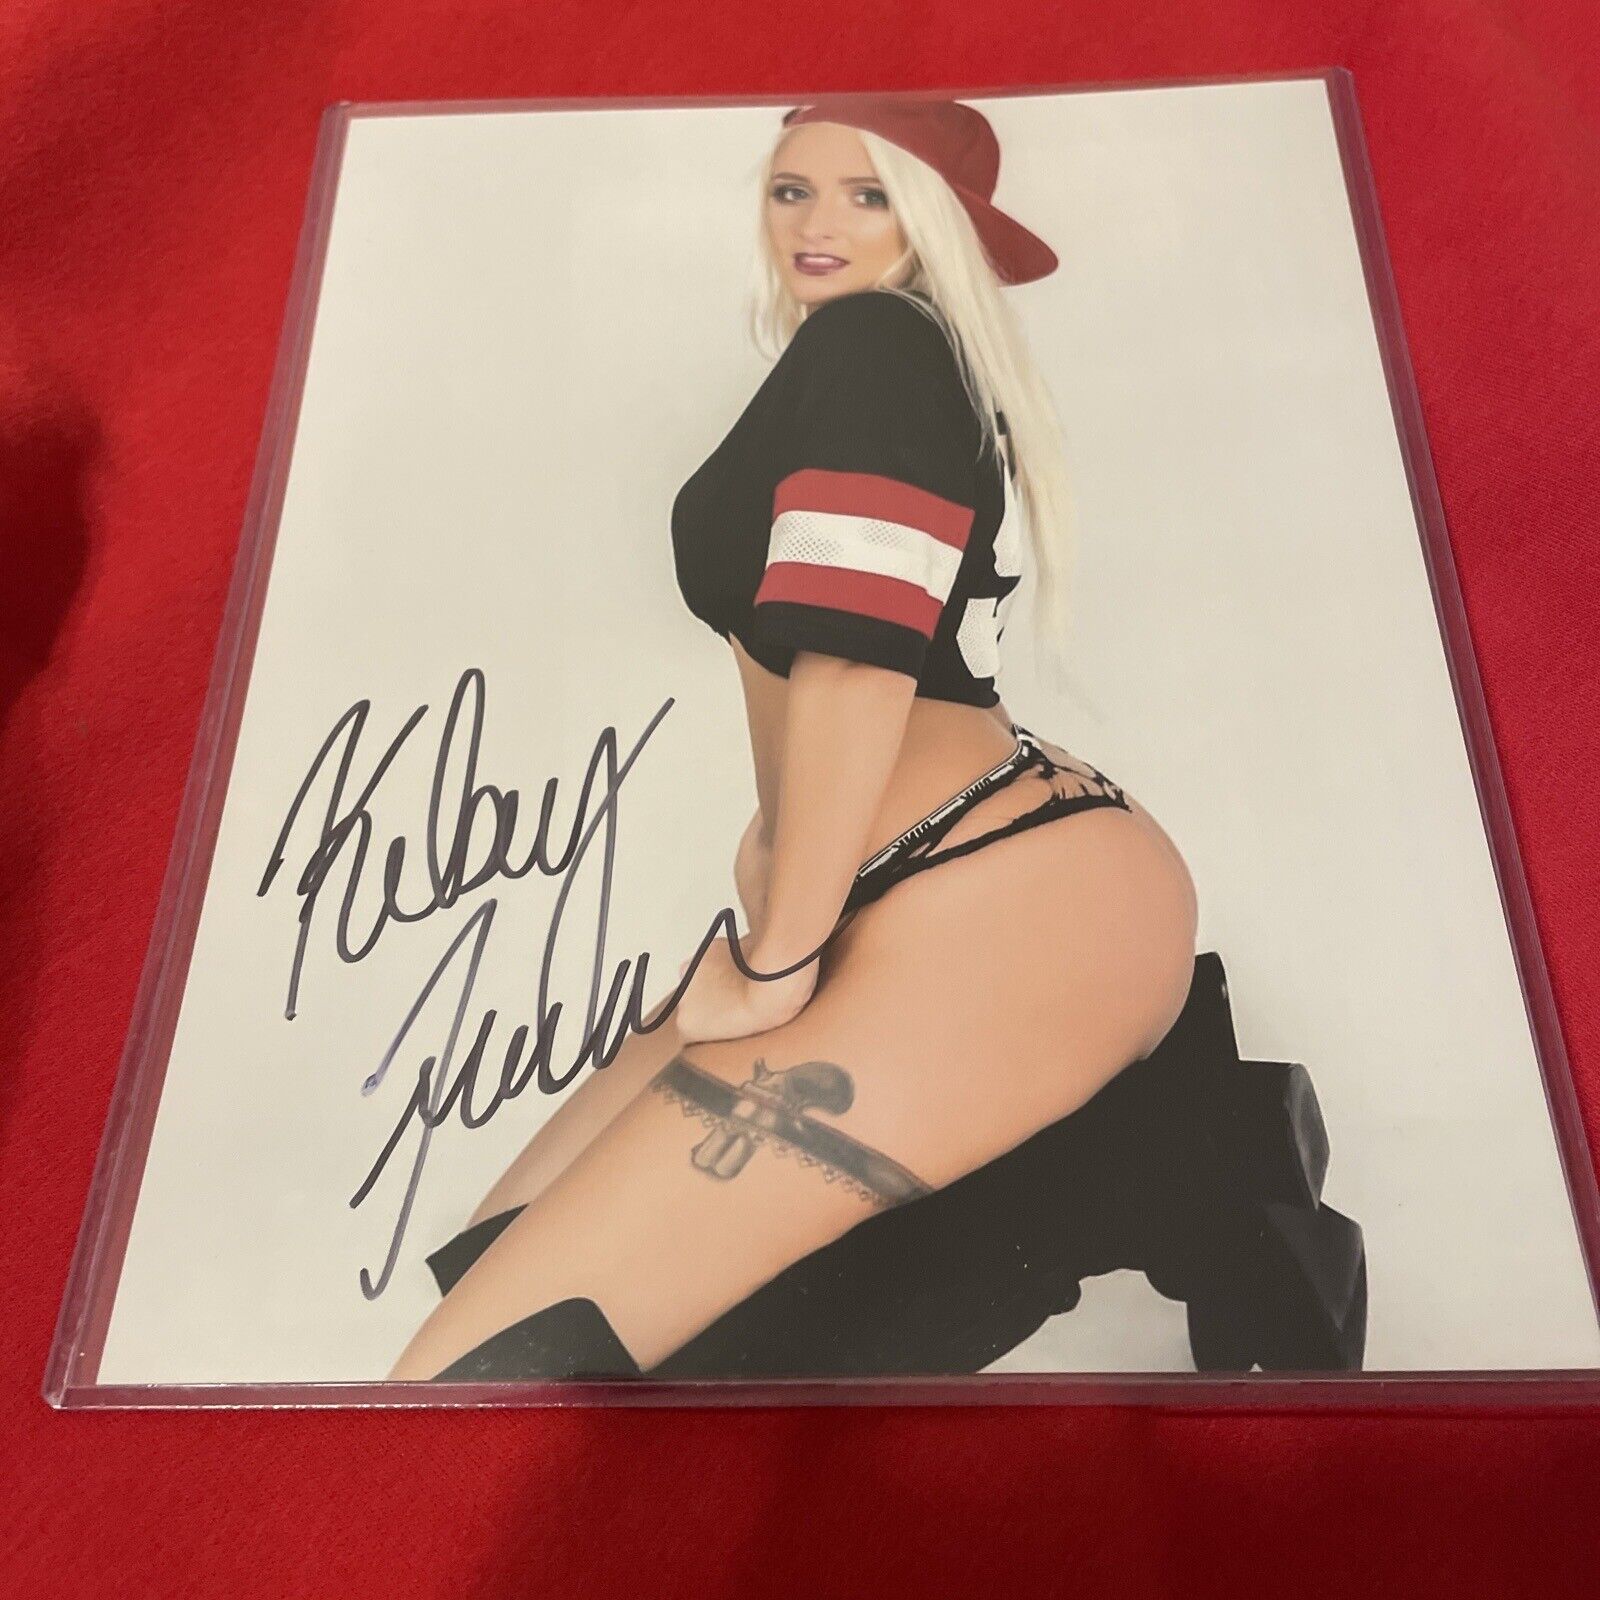 Kelsey Turner Playboy Model Autograph Picture Certified Authentic C